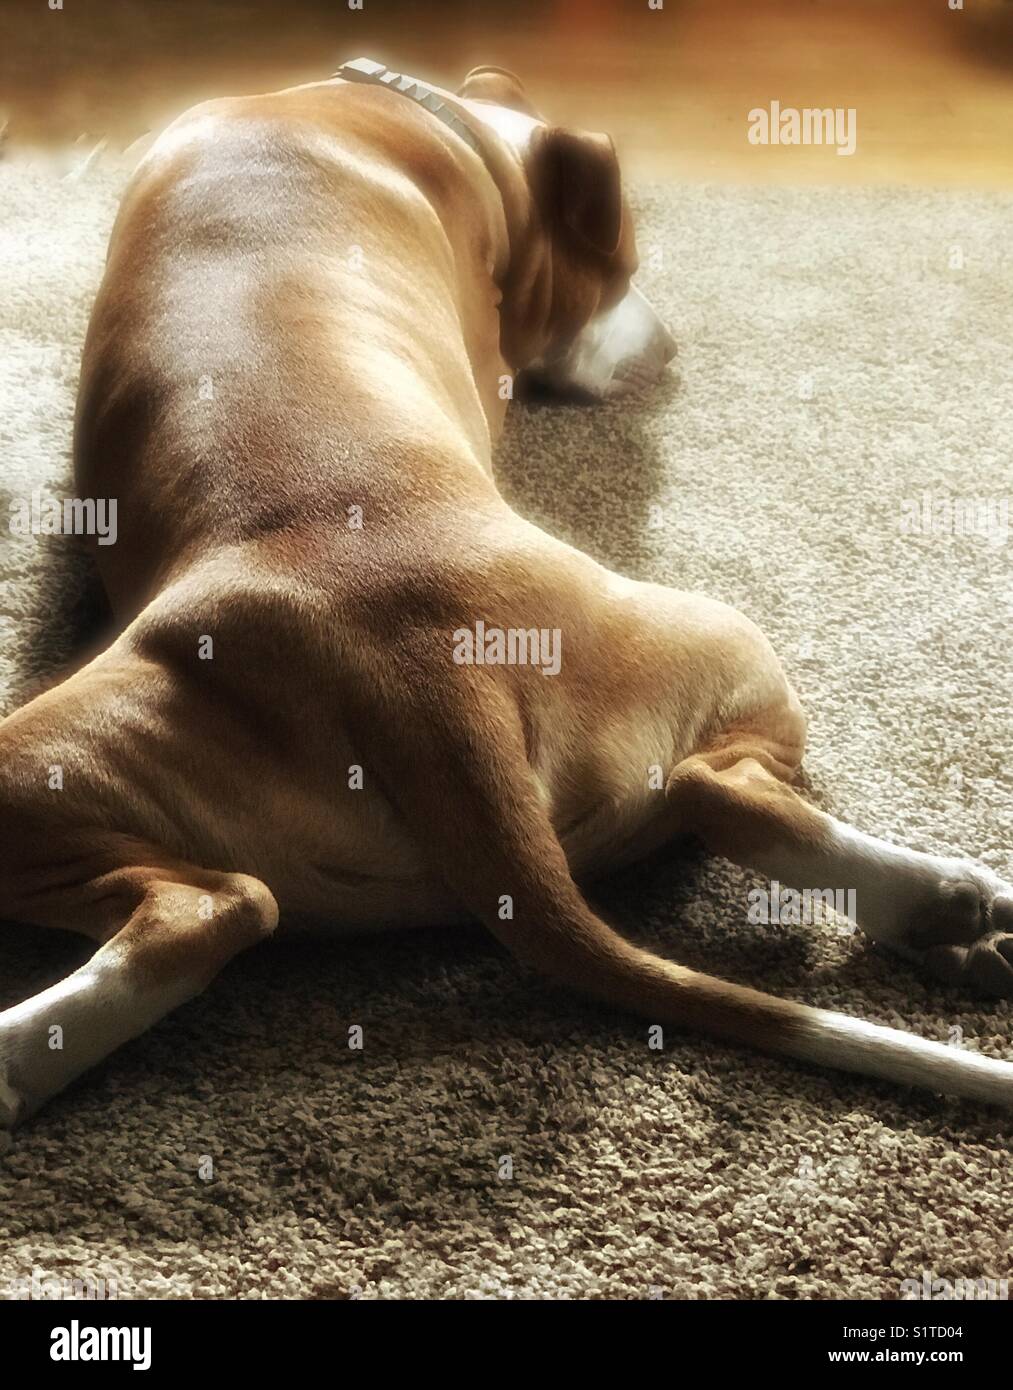 Sleeping dog sprawled out on his belly Stock Photo